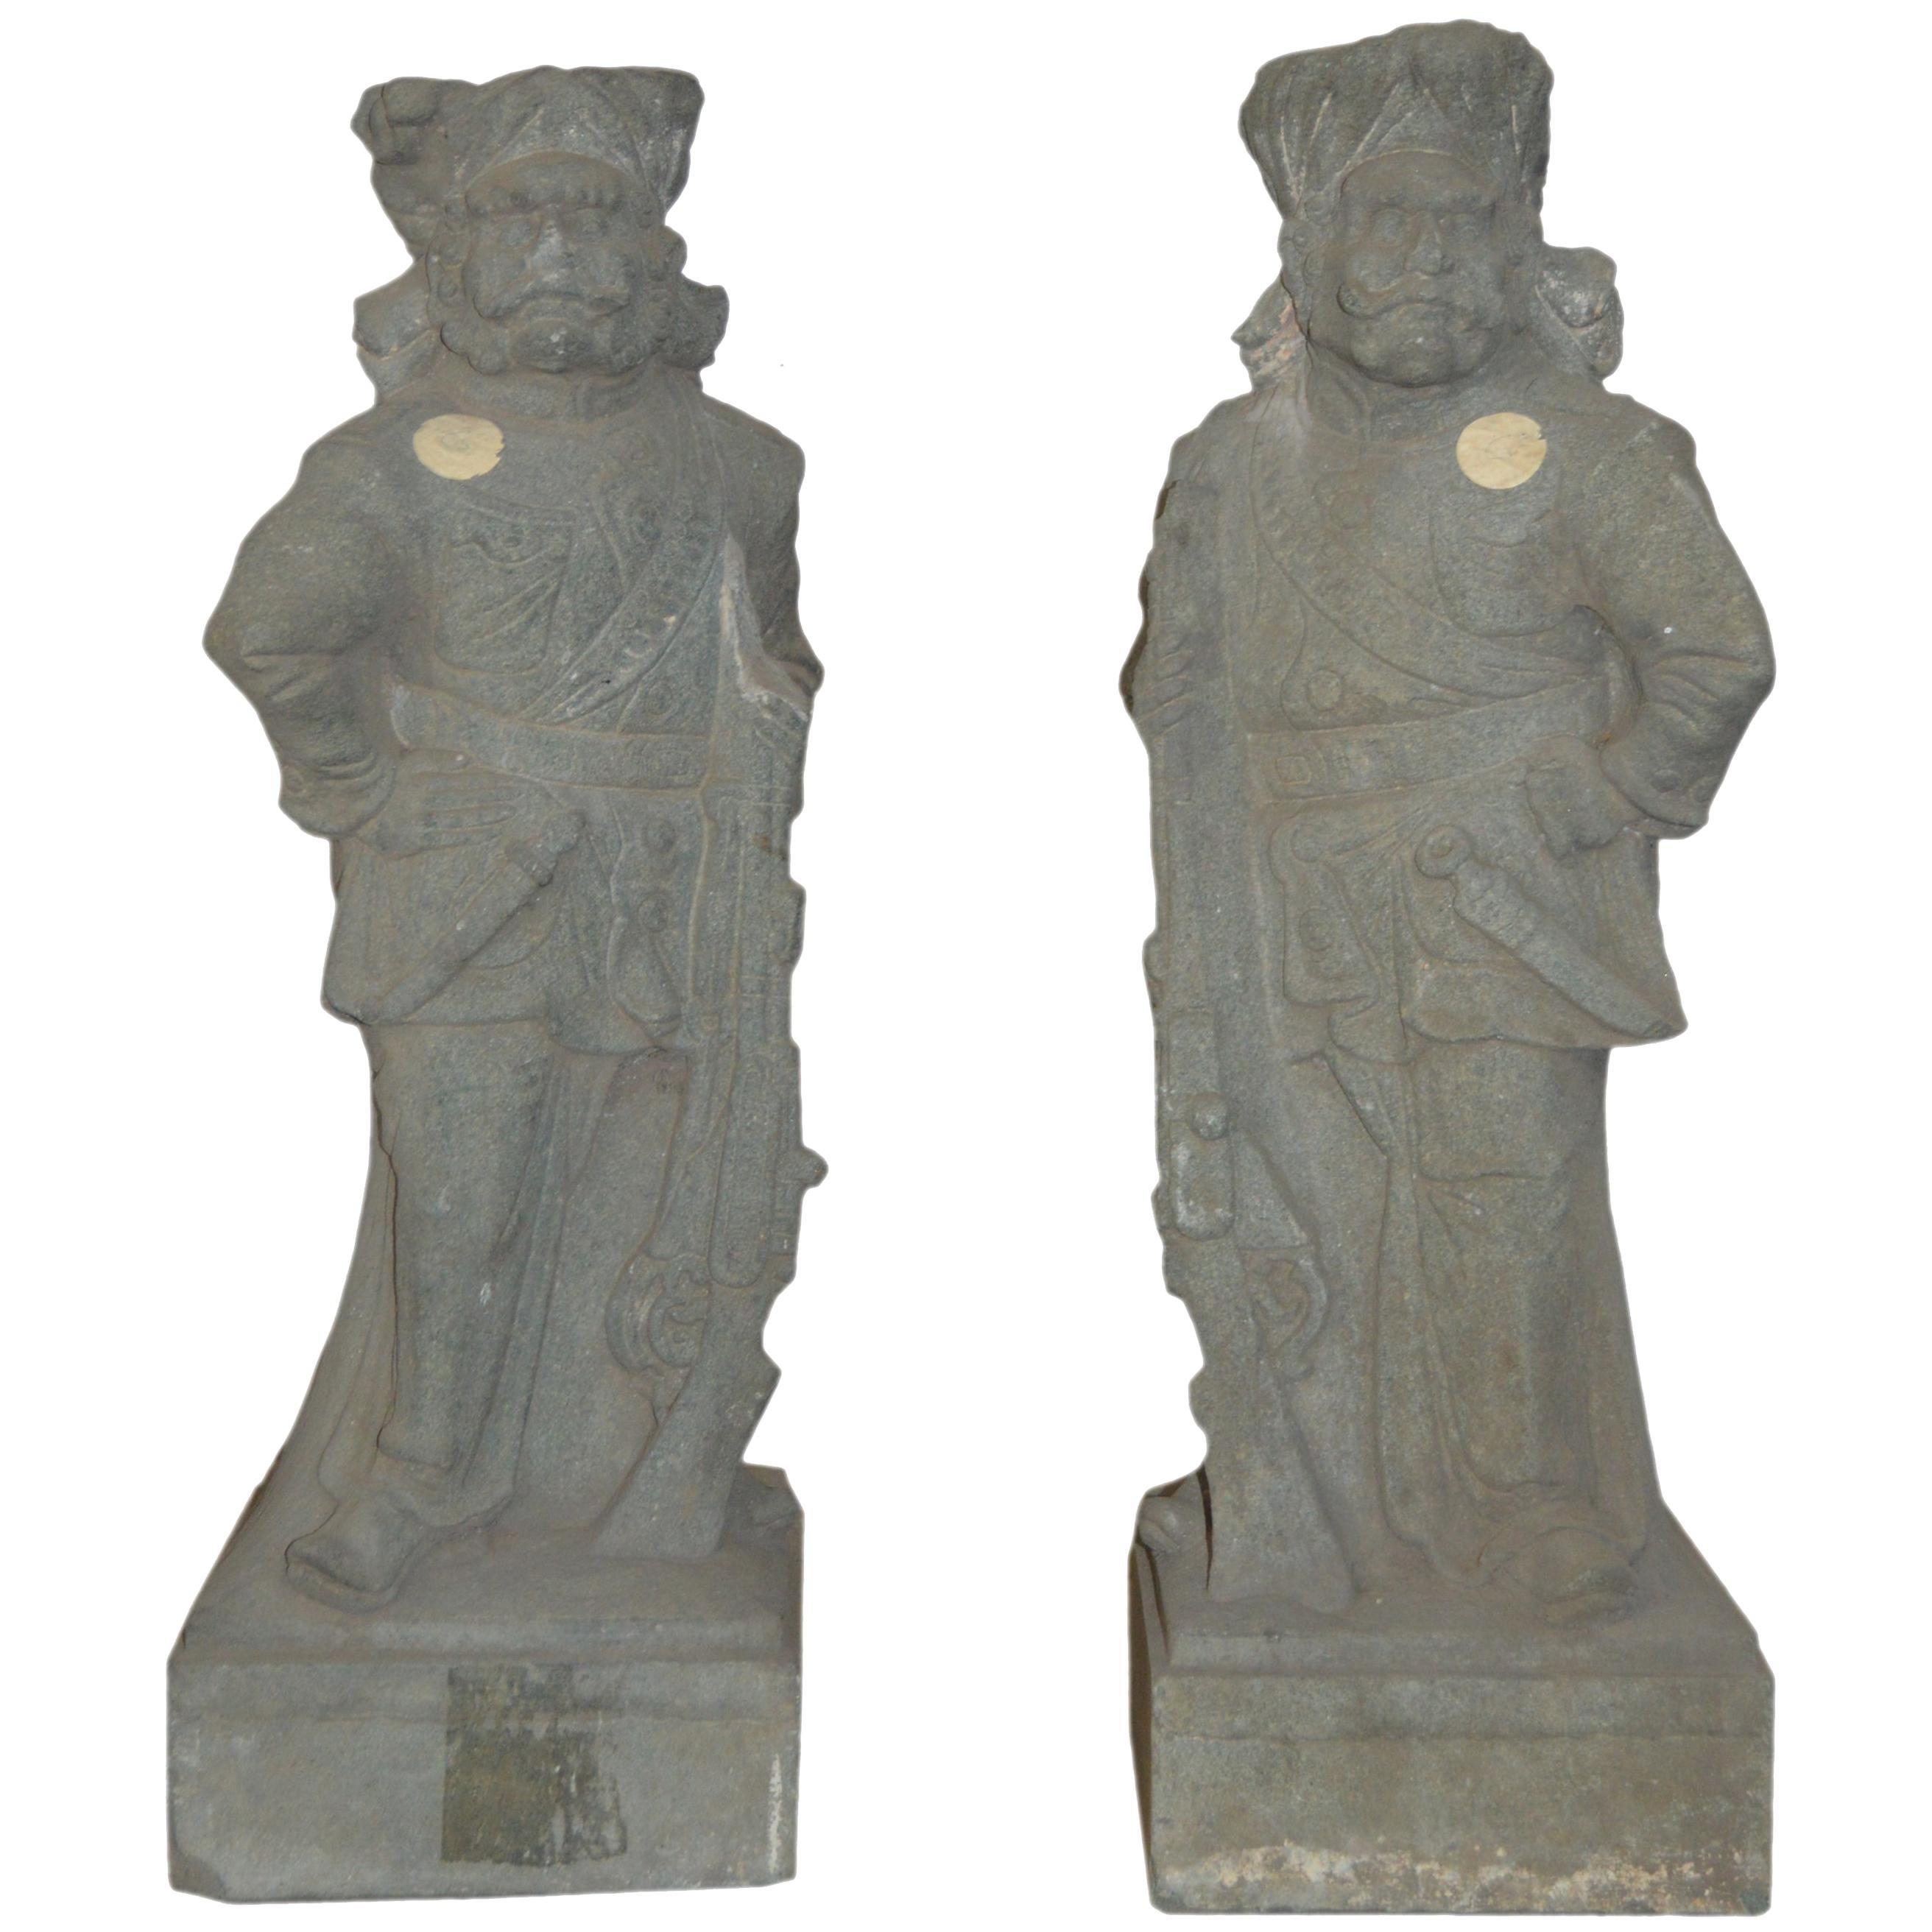 Pair of 19th Century Indian Hand-Carved Grey Stone Soldier Temple Sculptures